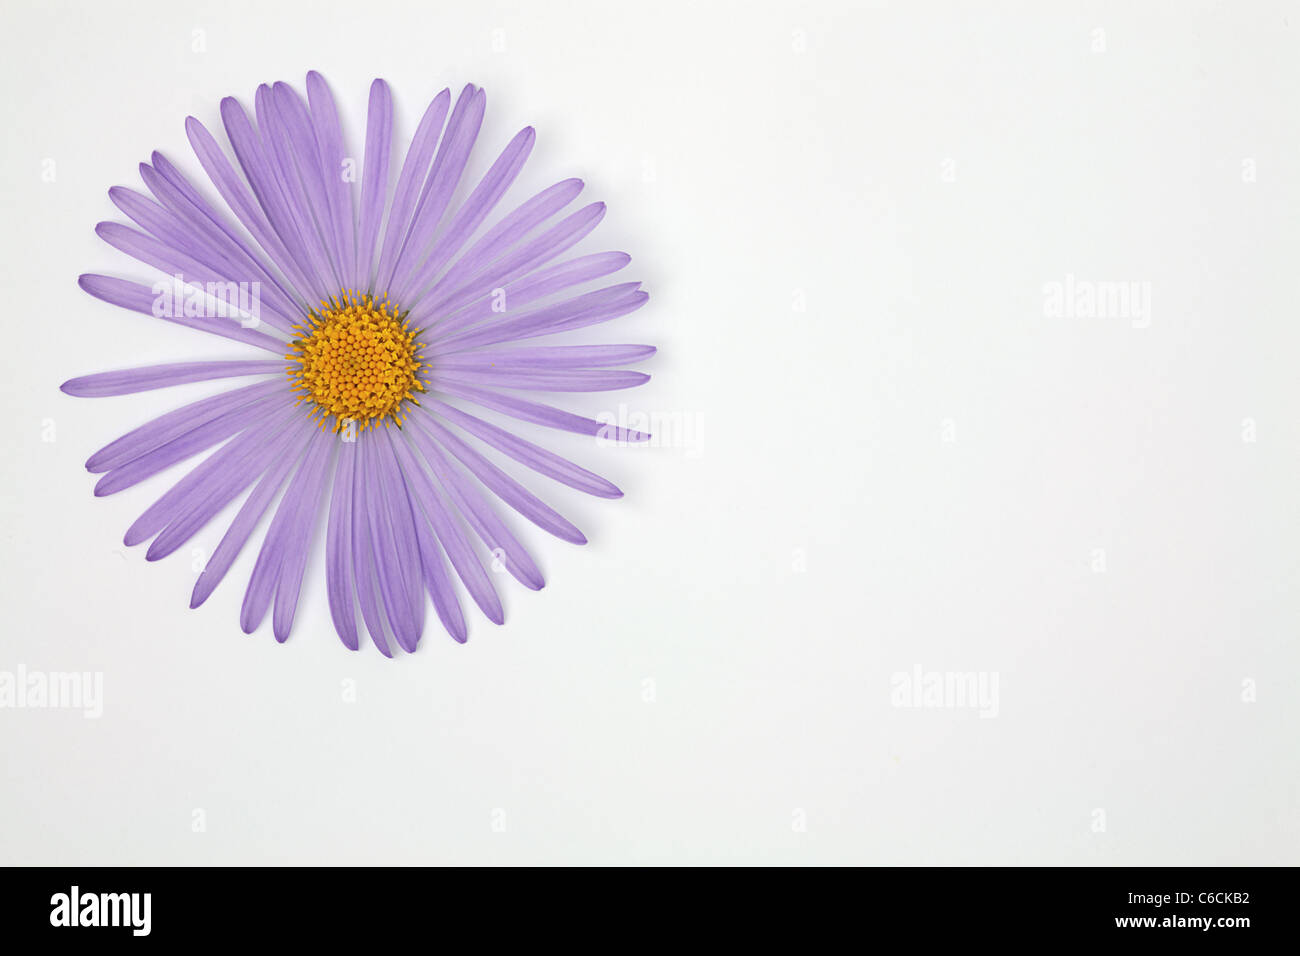 Lilac flower of Aster with thin long petals over white in the top left corner of the image Stock Photo